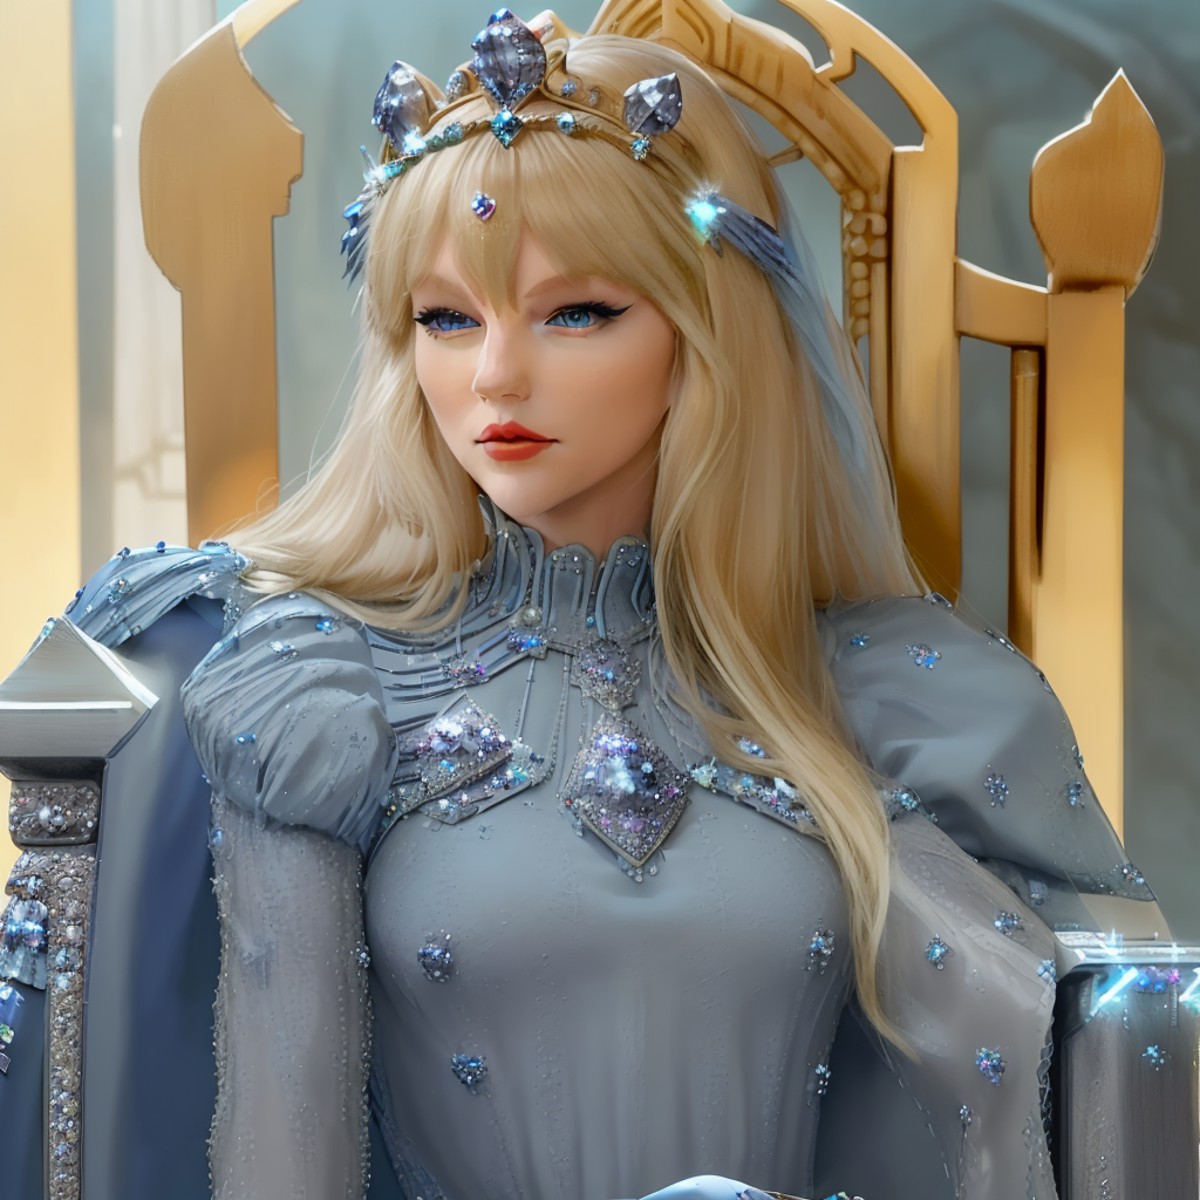 <lora:Taysway_V5-10:1> Taysway, woman, long blonde hair, dressed like a queen, wearing a crown, regal expression, castle t...